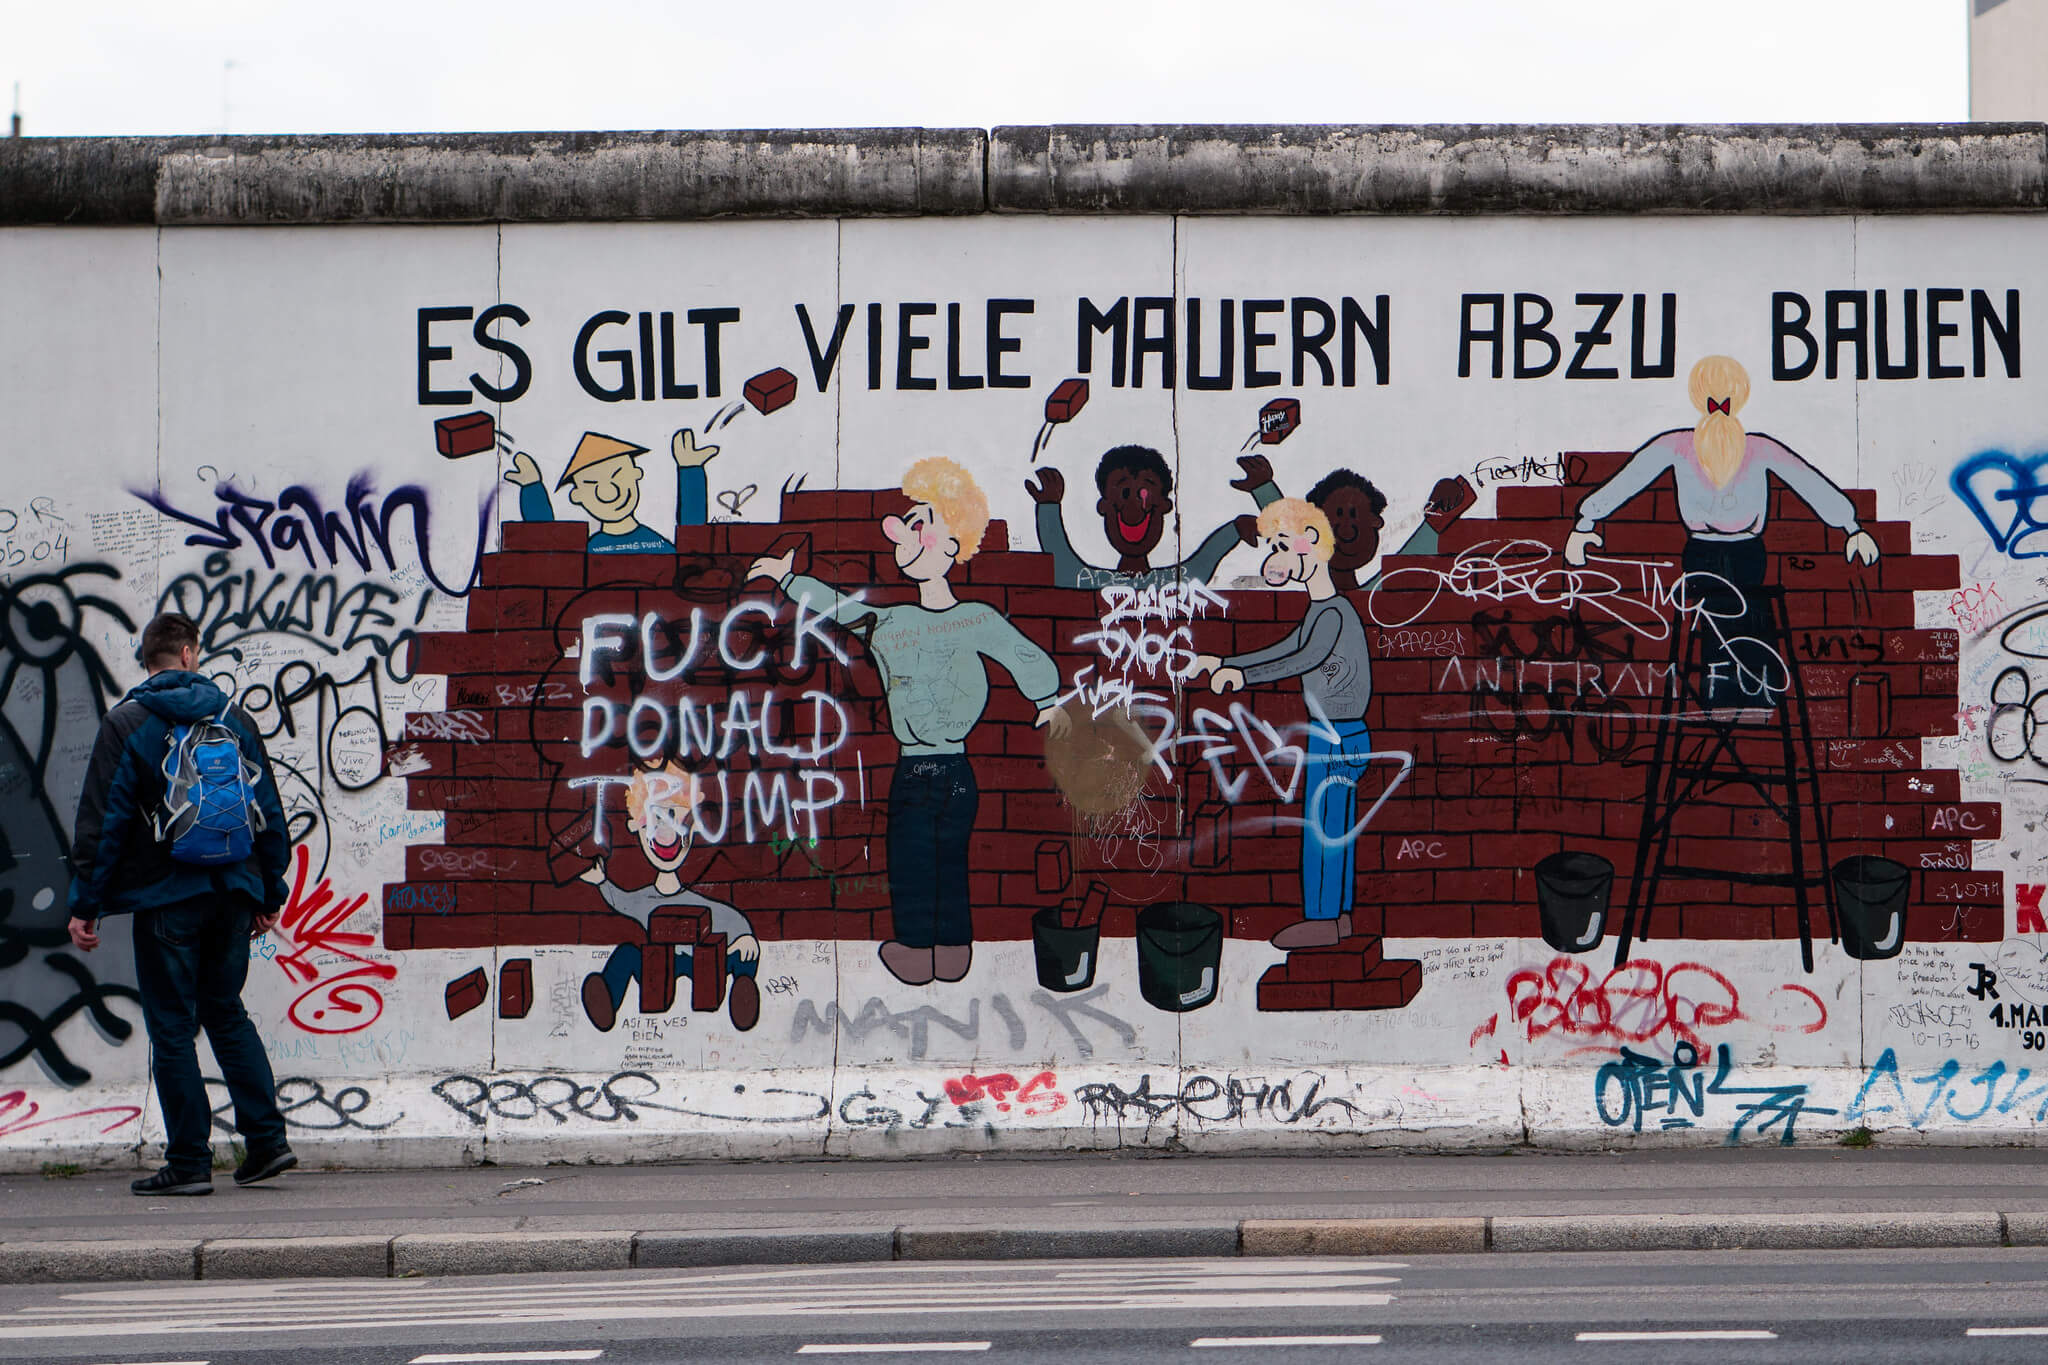 Frohlich-Es gilt viele Mauern abzubauen (It is necessary to break down many walls) by Ines Bayer, East Side Gallery in Berlin, 2017. Lorie Shaull - Flickr